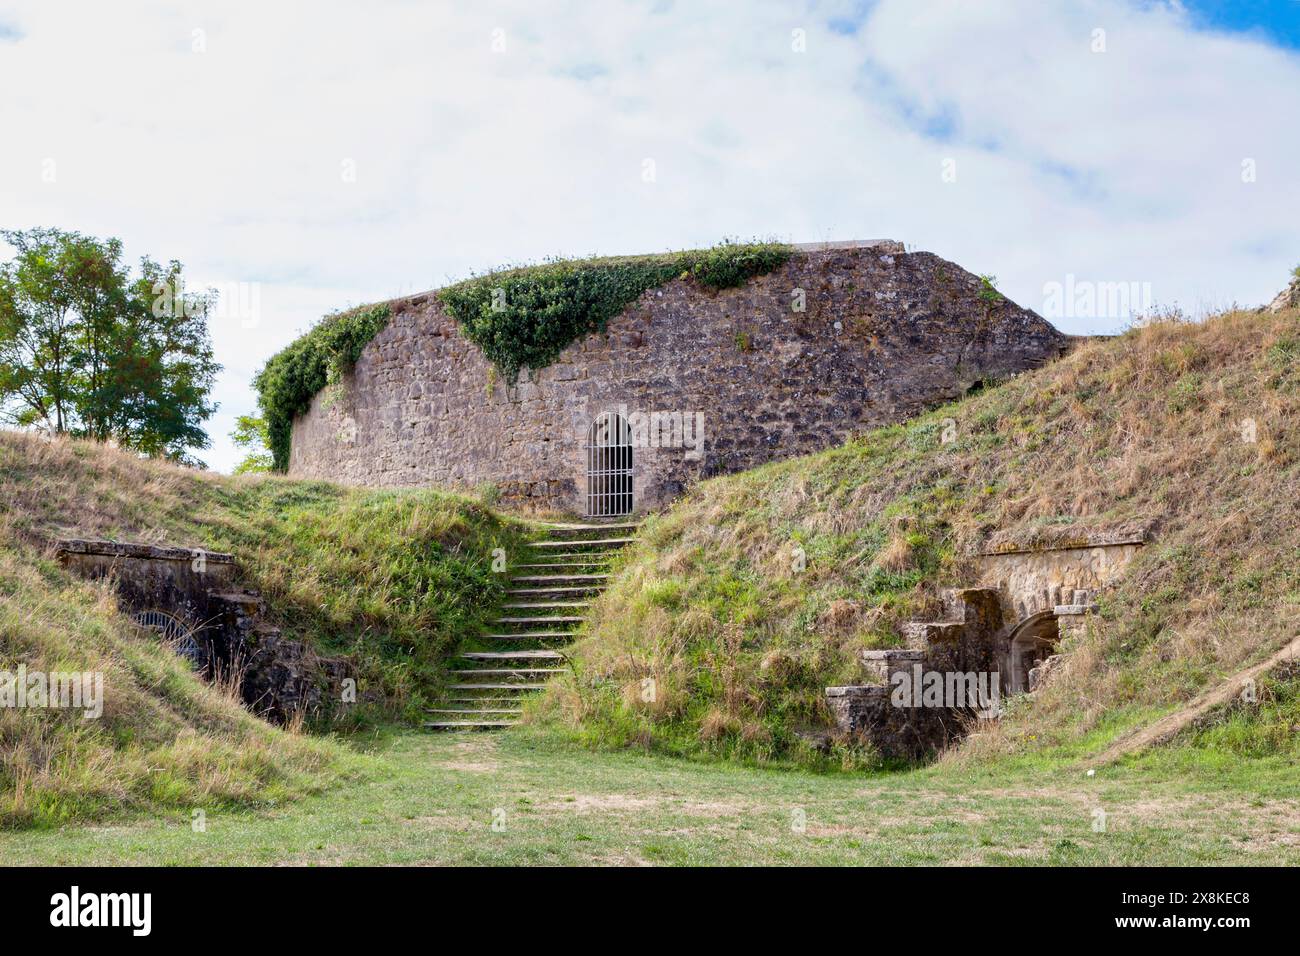 The Morlot Battery, also called Fort Morlot, is located in Laon (Aisne). It was built in 1878 by Séré de Rivières in order to establish military commu Stock Photo